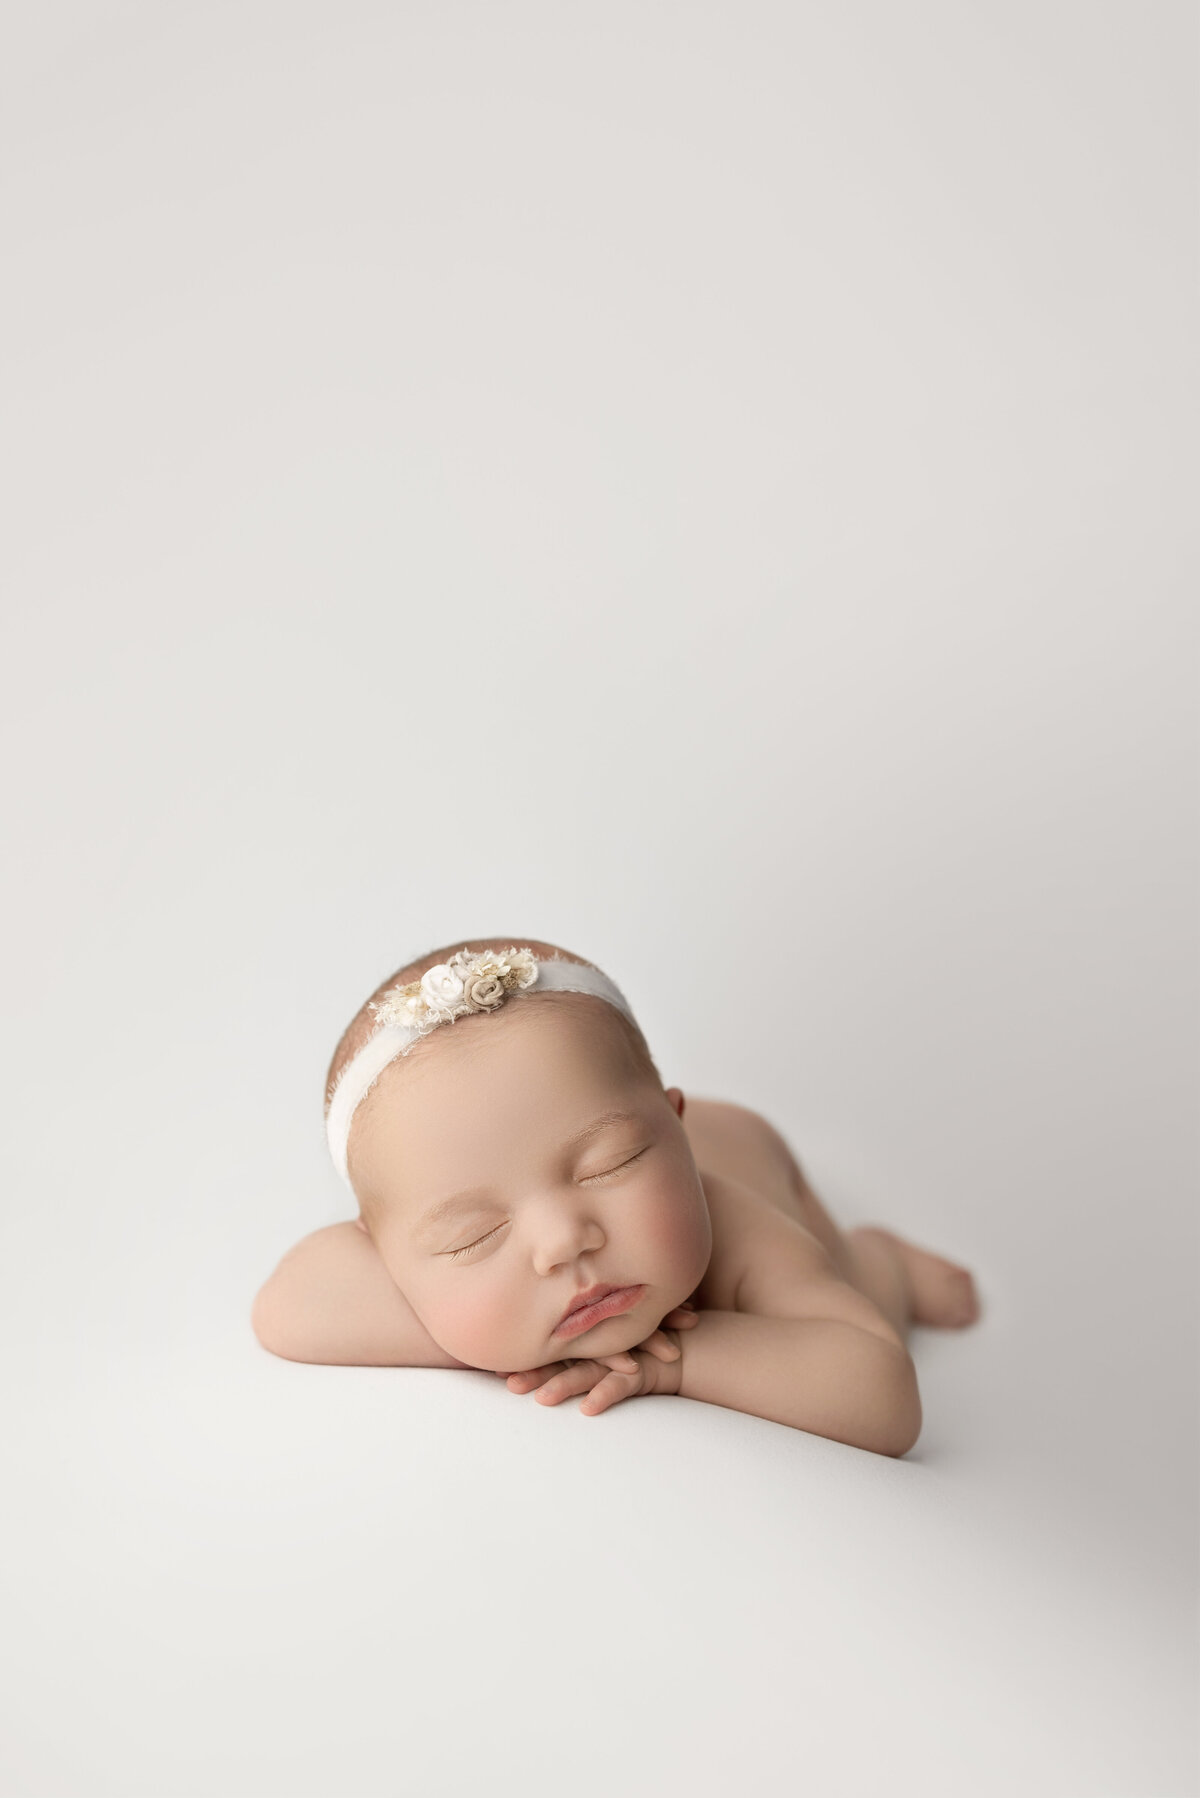 Fine art newborn baby photoshoot captured by best Main Line newborn baby photographer Katie Marshall. Newborn baby girl is sleeping on her belly on white stretch fabric. Baby girl's hands are folded underneath her chin and her head resting on her forearm. She is wearing a delicate floral headband.